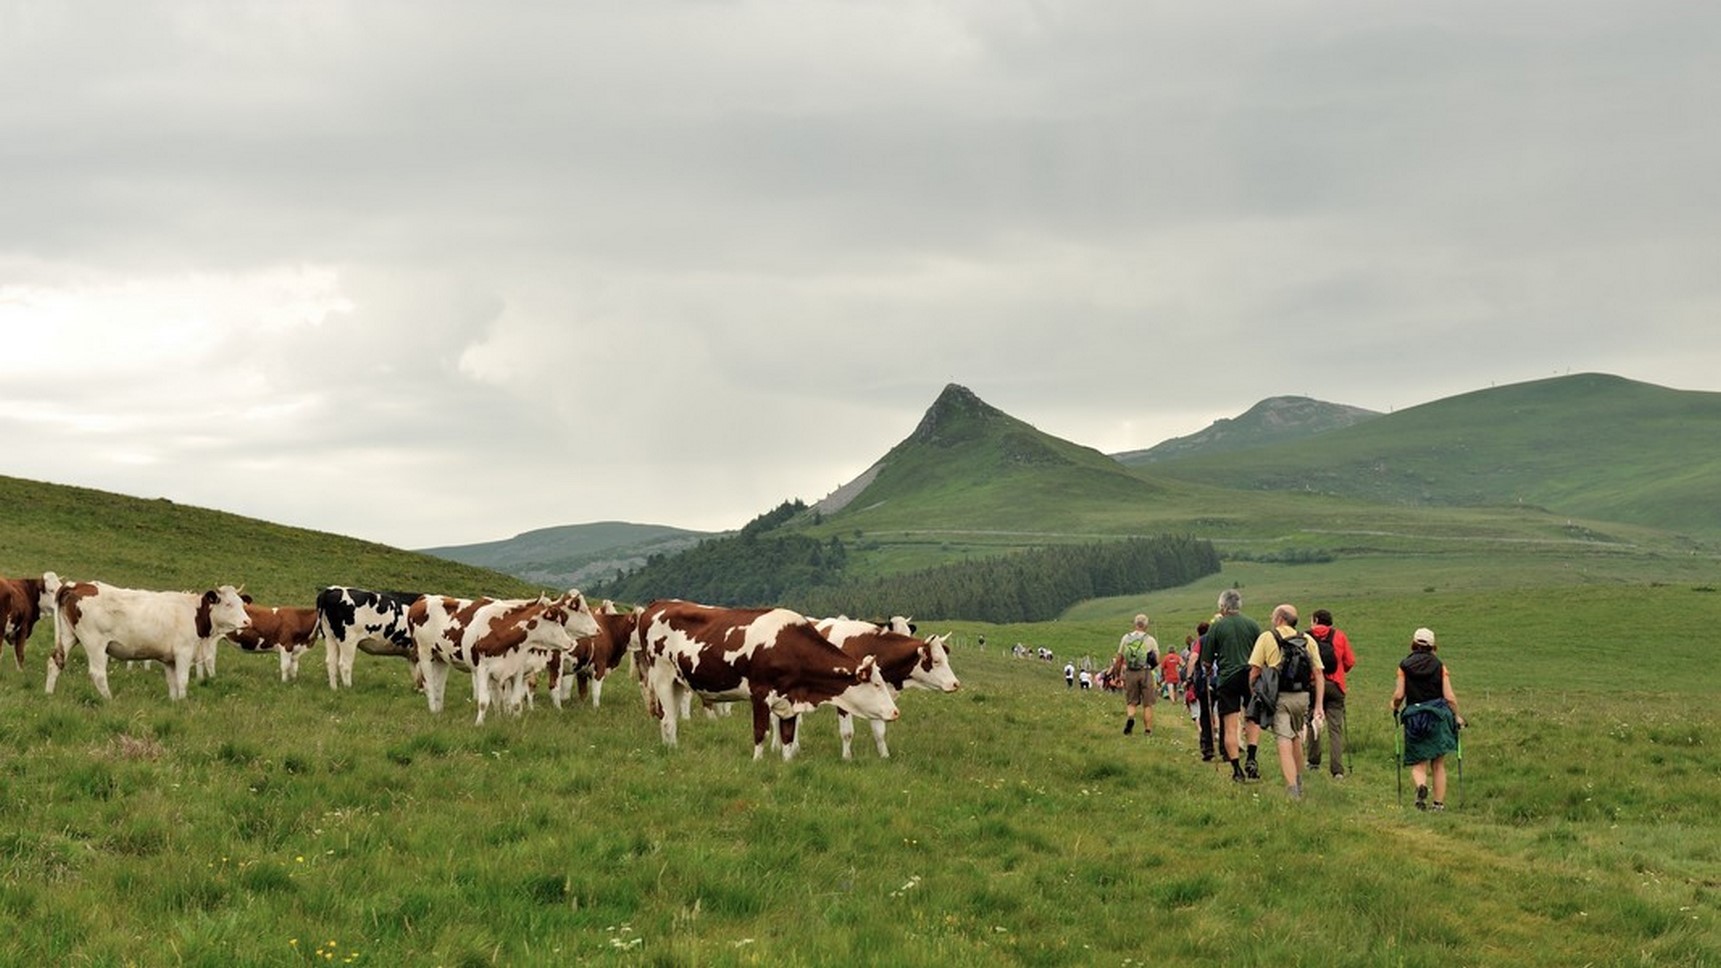 Puy de Sancy - meeting between a group of hikers and a herd in the mountain pastures